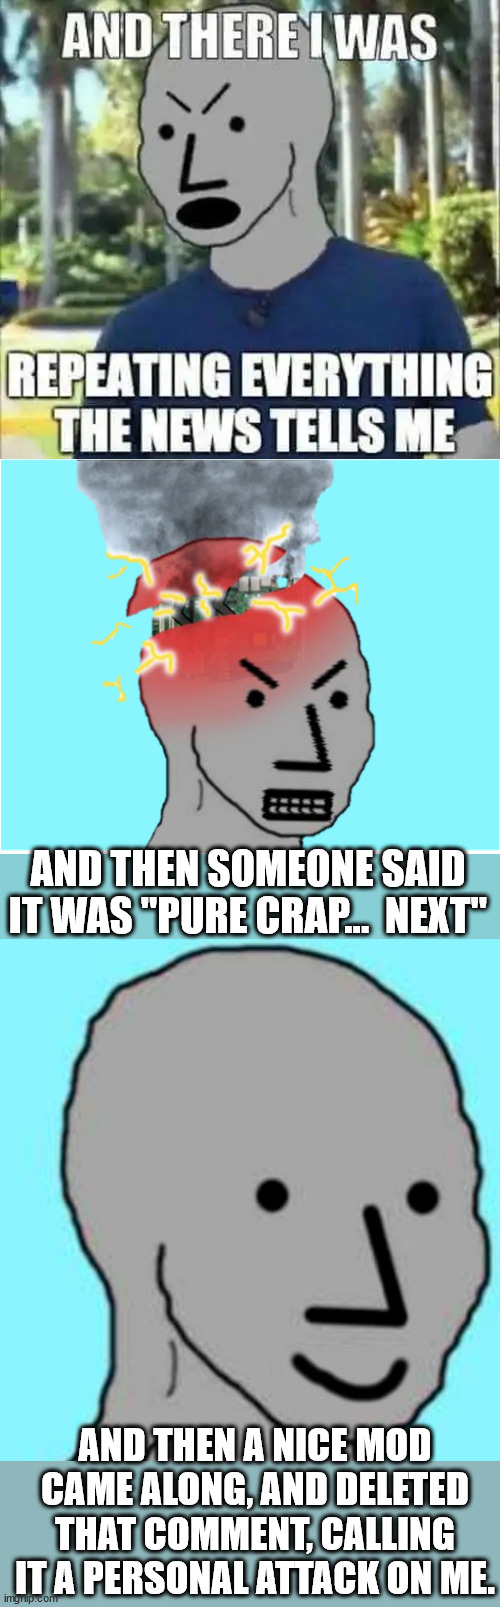 And the violation was "Pure Crap" too | AND THEN SOMEONE SAID IT WAS "PURE CRAP...  NEXT"; AND THEN A NICE MOD CAME ALONG, AND DELETED THAT COMMENT, CALLING IT A PERSONAL ATTACK ON ME. | image tagged in npc meltdown,pure crap,tos violation | made w/ Imgflip meme maker